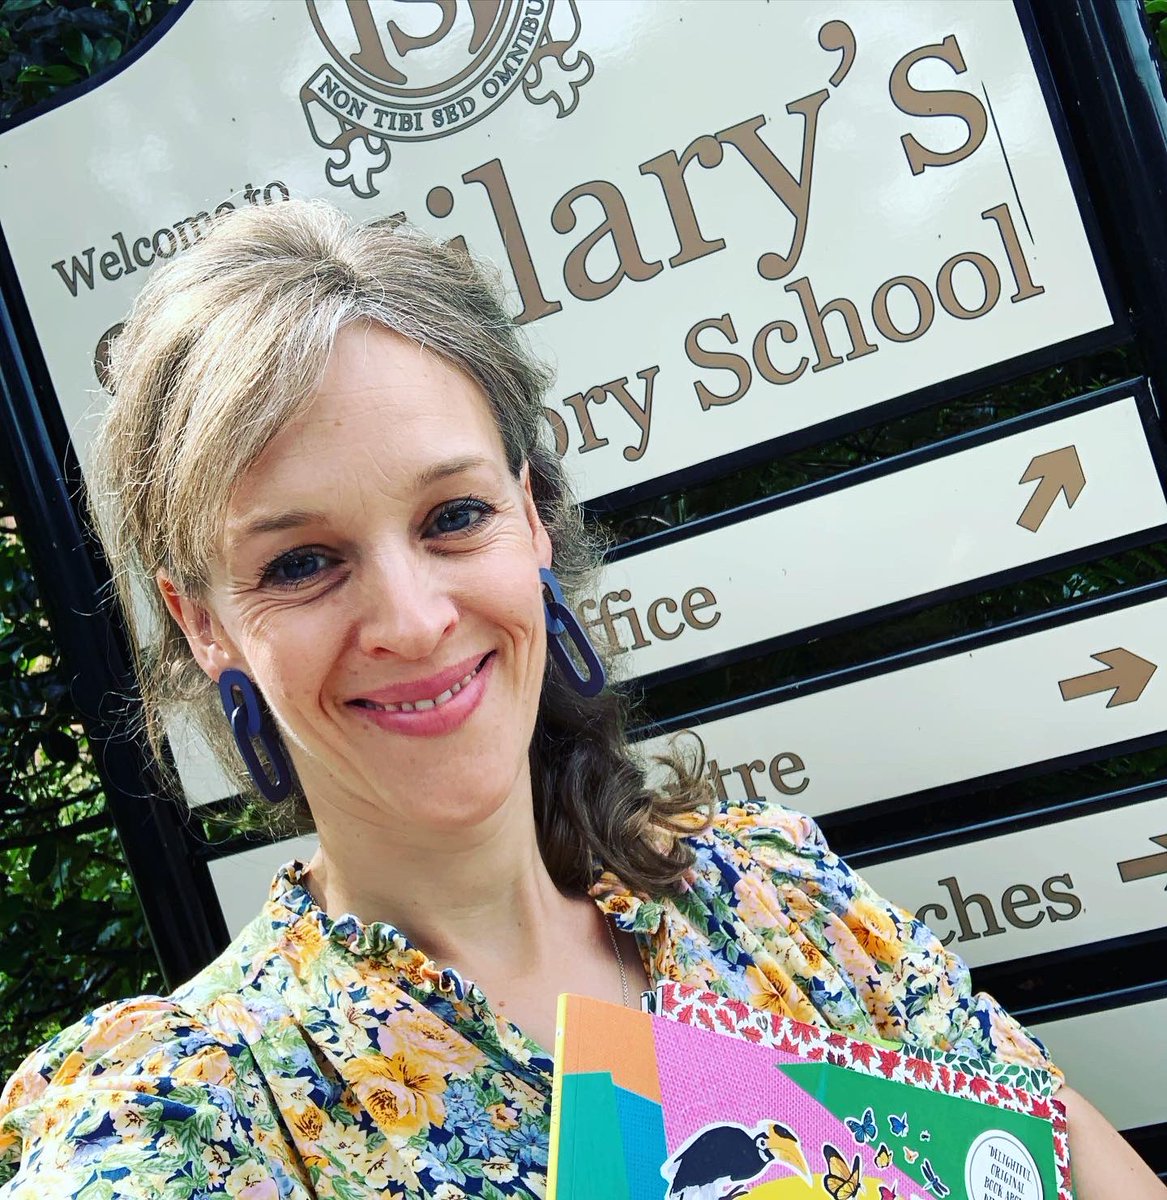 Such a fun visit with @StHilarysSchool #Surrey today Thank you to all the fab Y2 nature lovers for a gorgeous morning exploring animal families together 💕🐝🐋🐘🦋🐠🦒 #DiversityandInclusion #family #childrensbooks #teach #nature